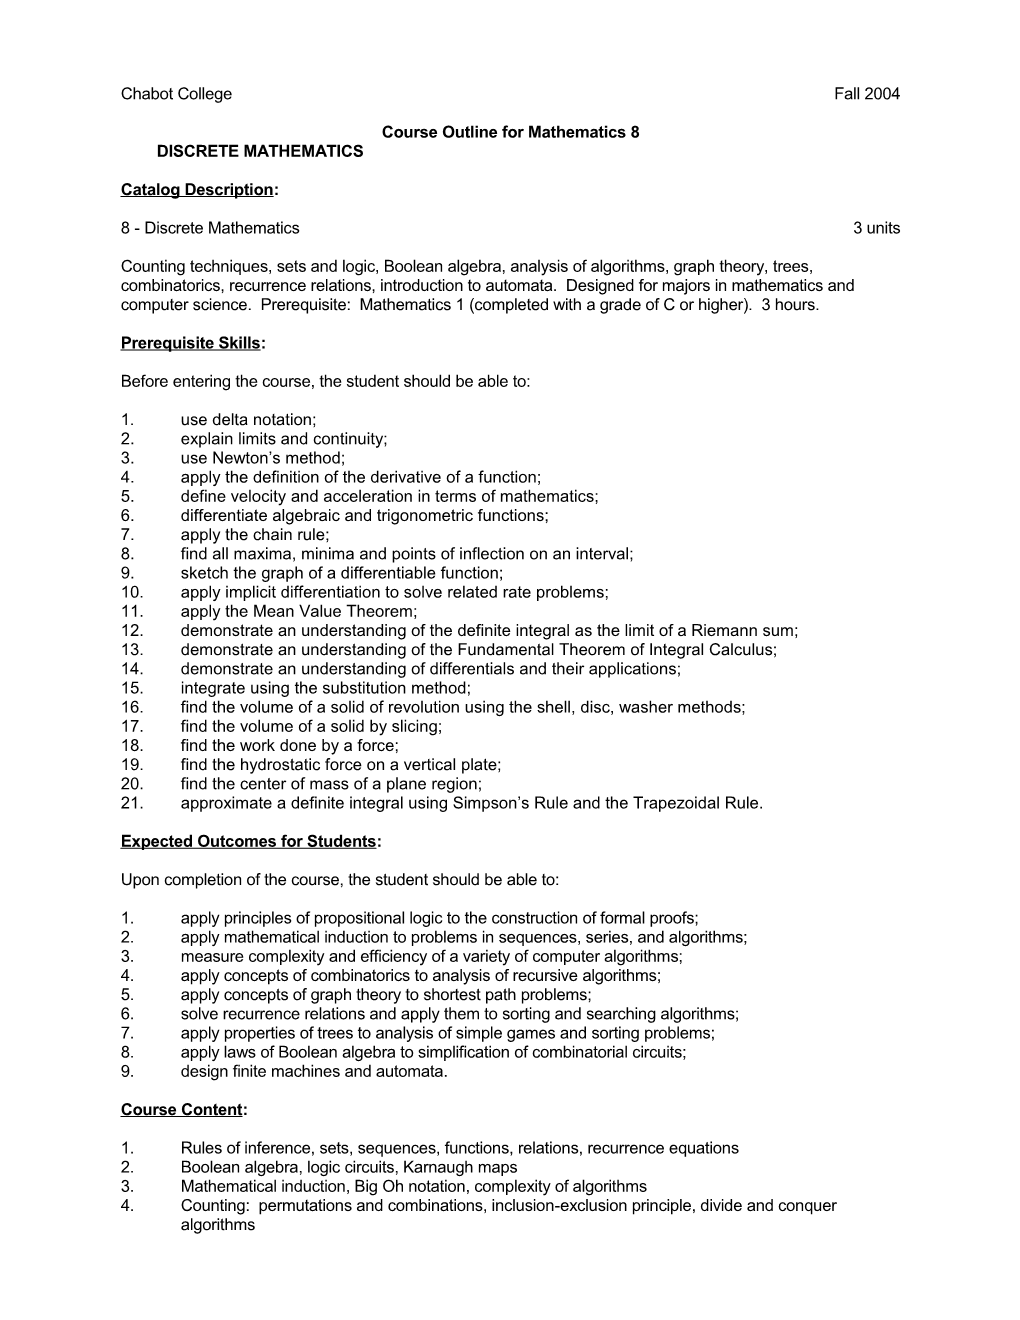 Course Outline for Mathematics 8, Page 1